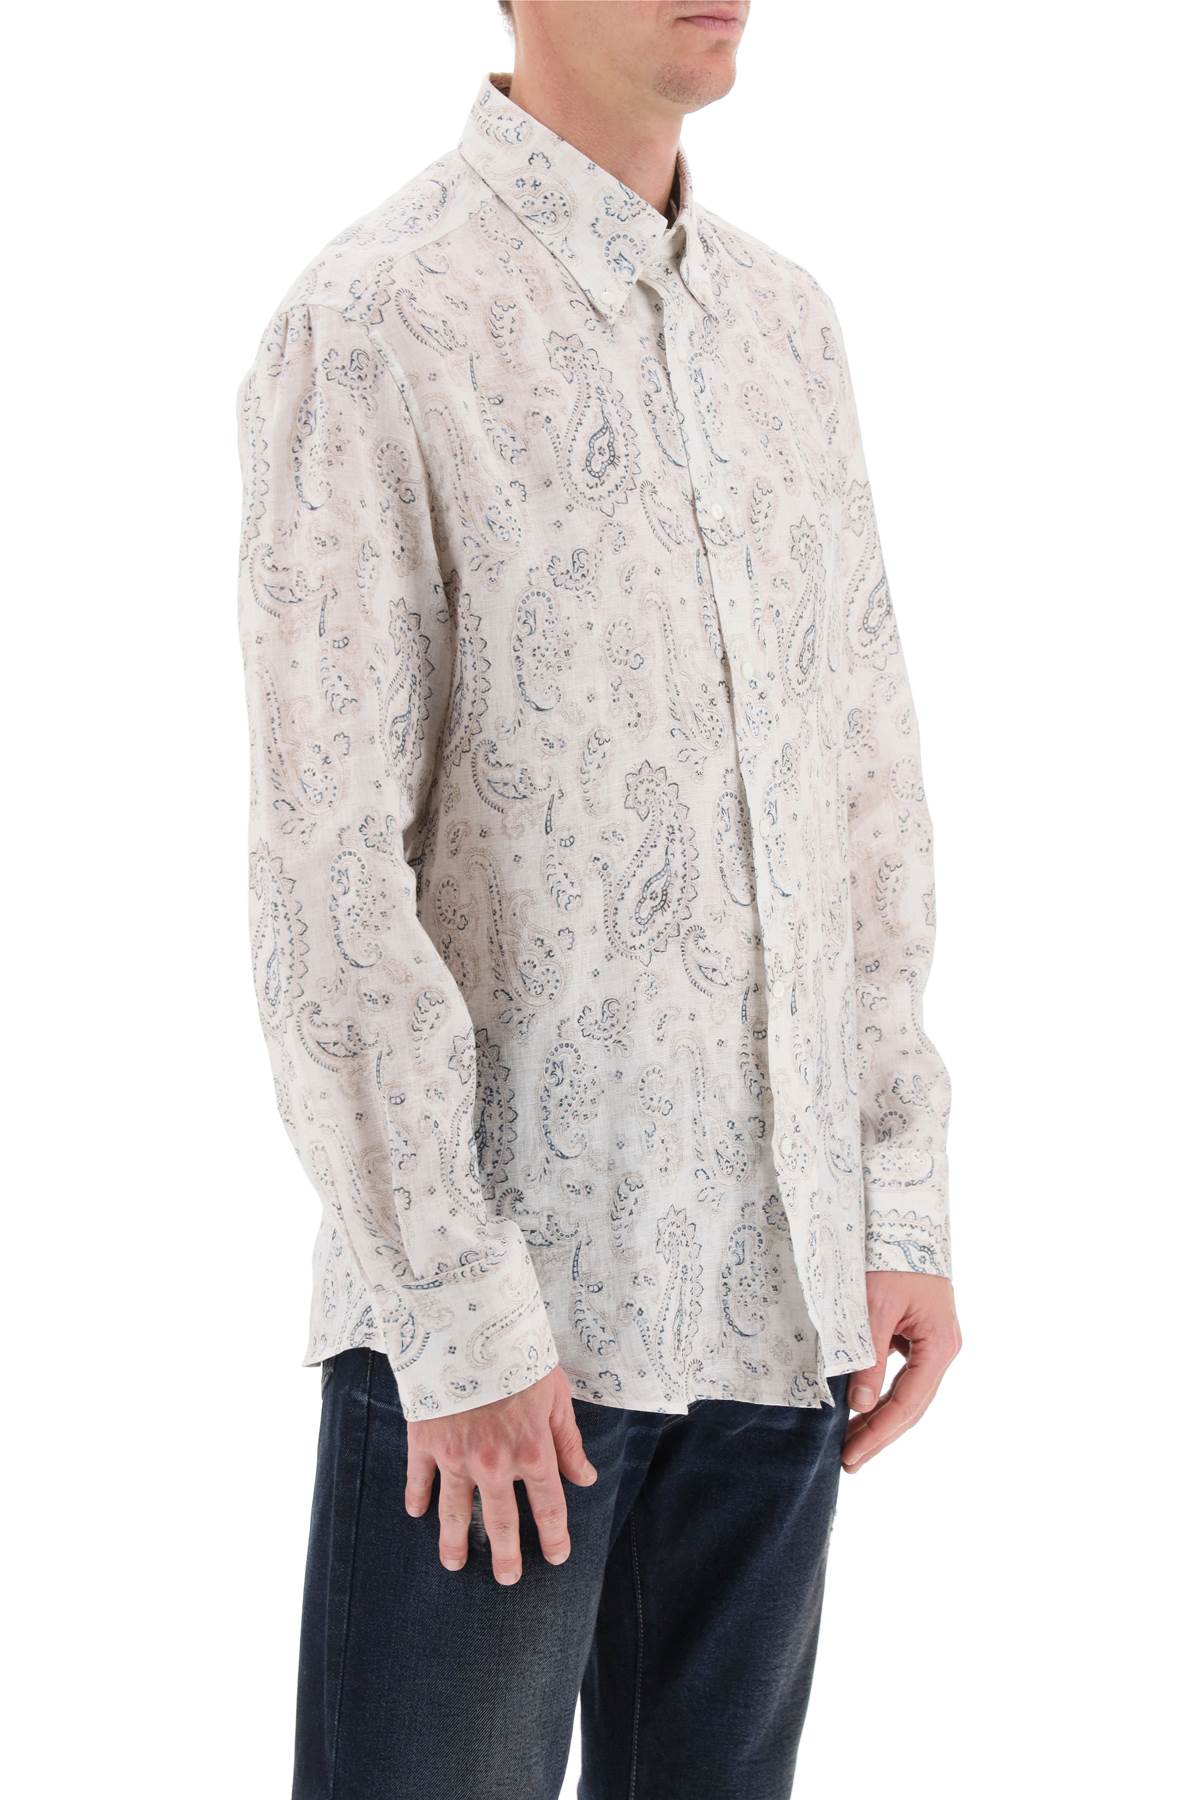 linen shirt with paisley pattern-1